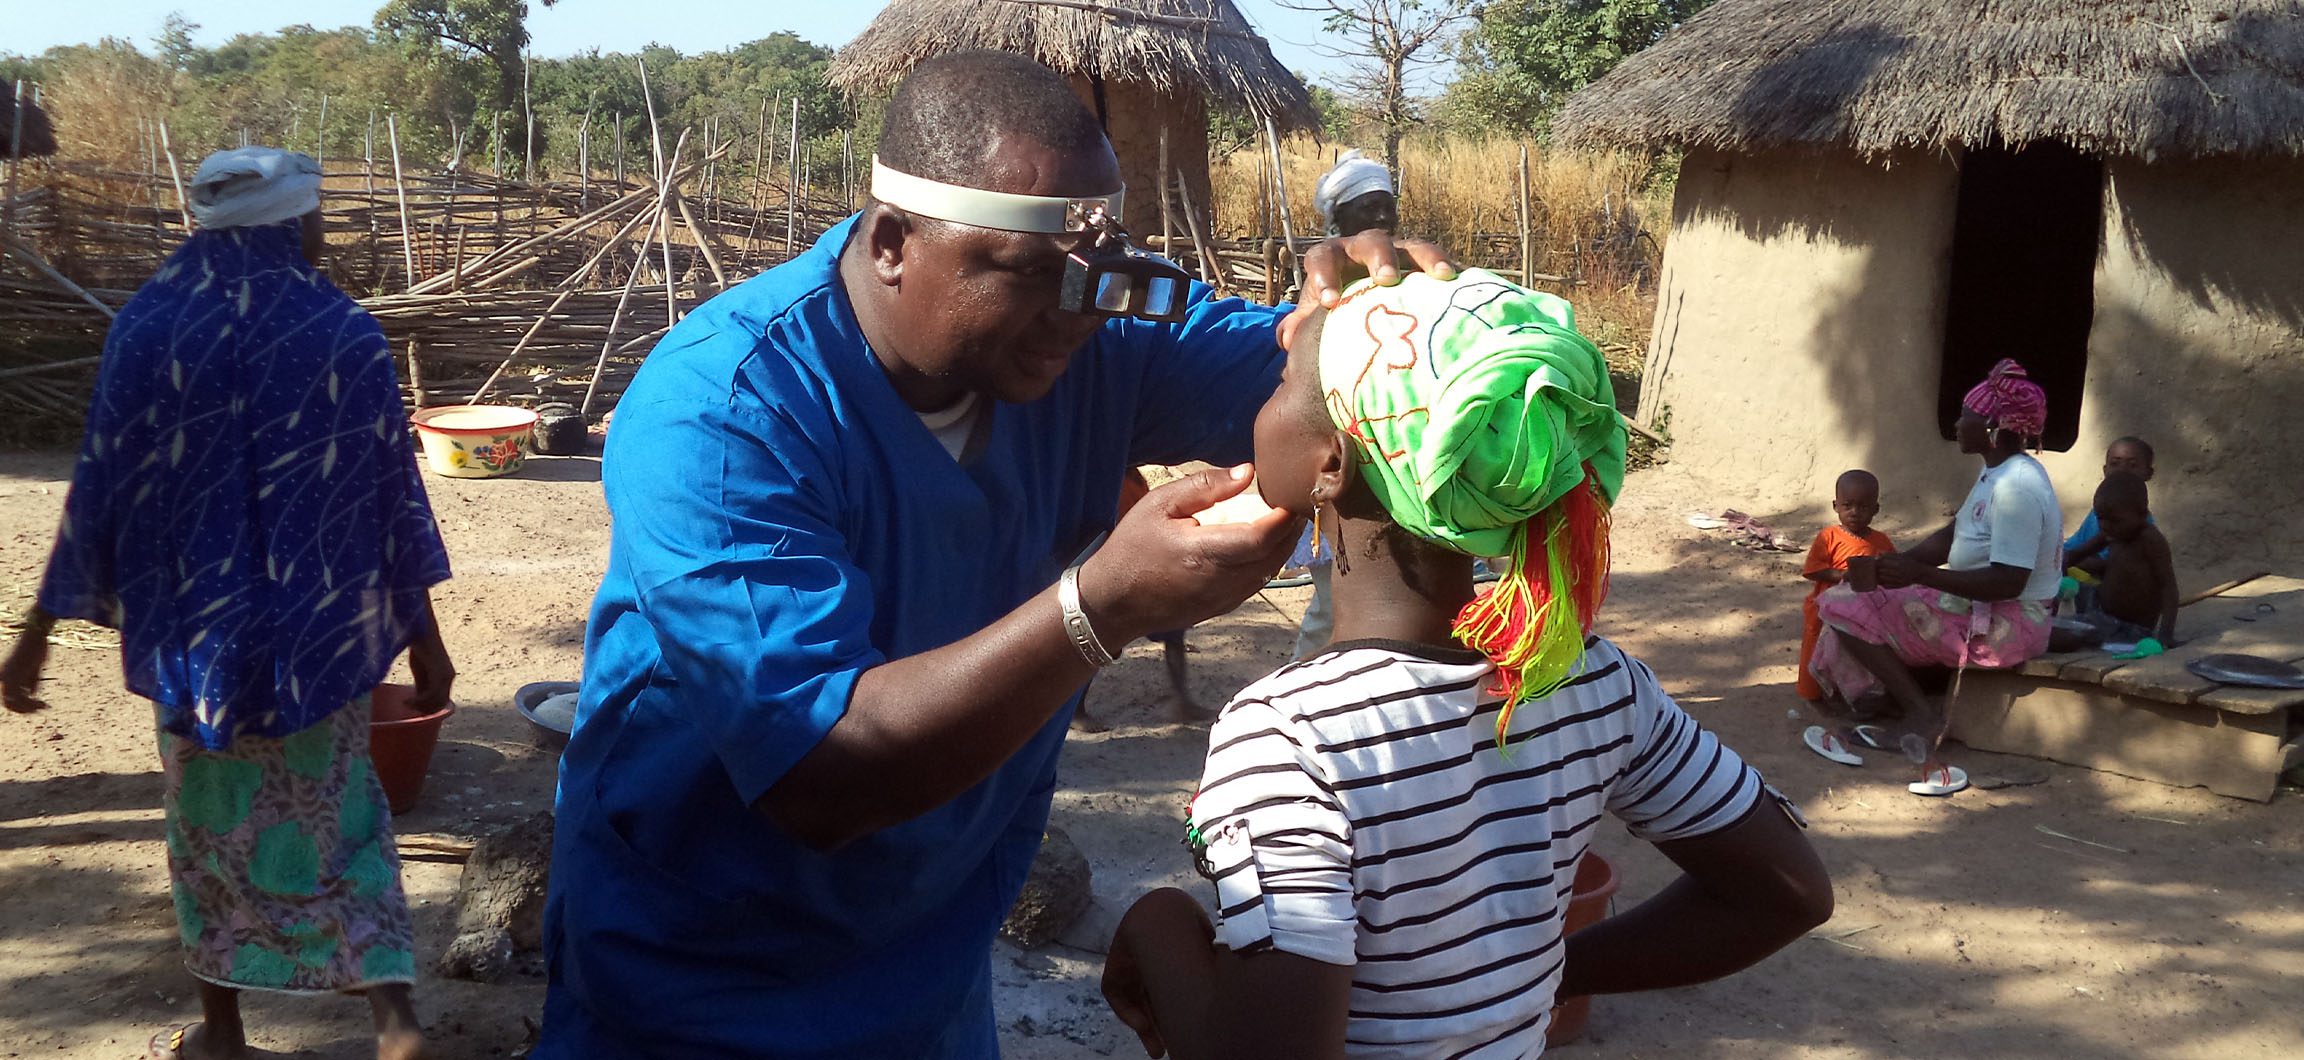 A healthcare worker examines the eyes of a young person. They are standing outside in a village.